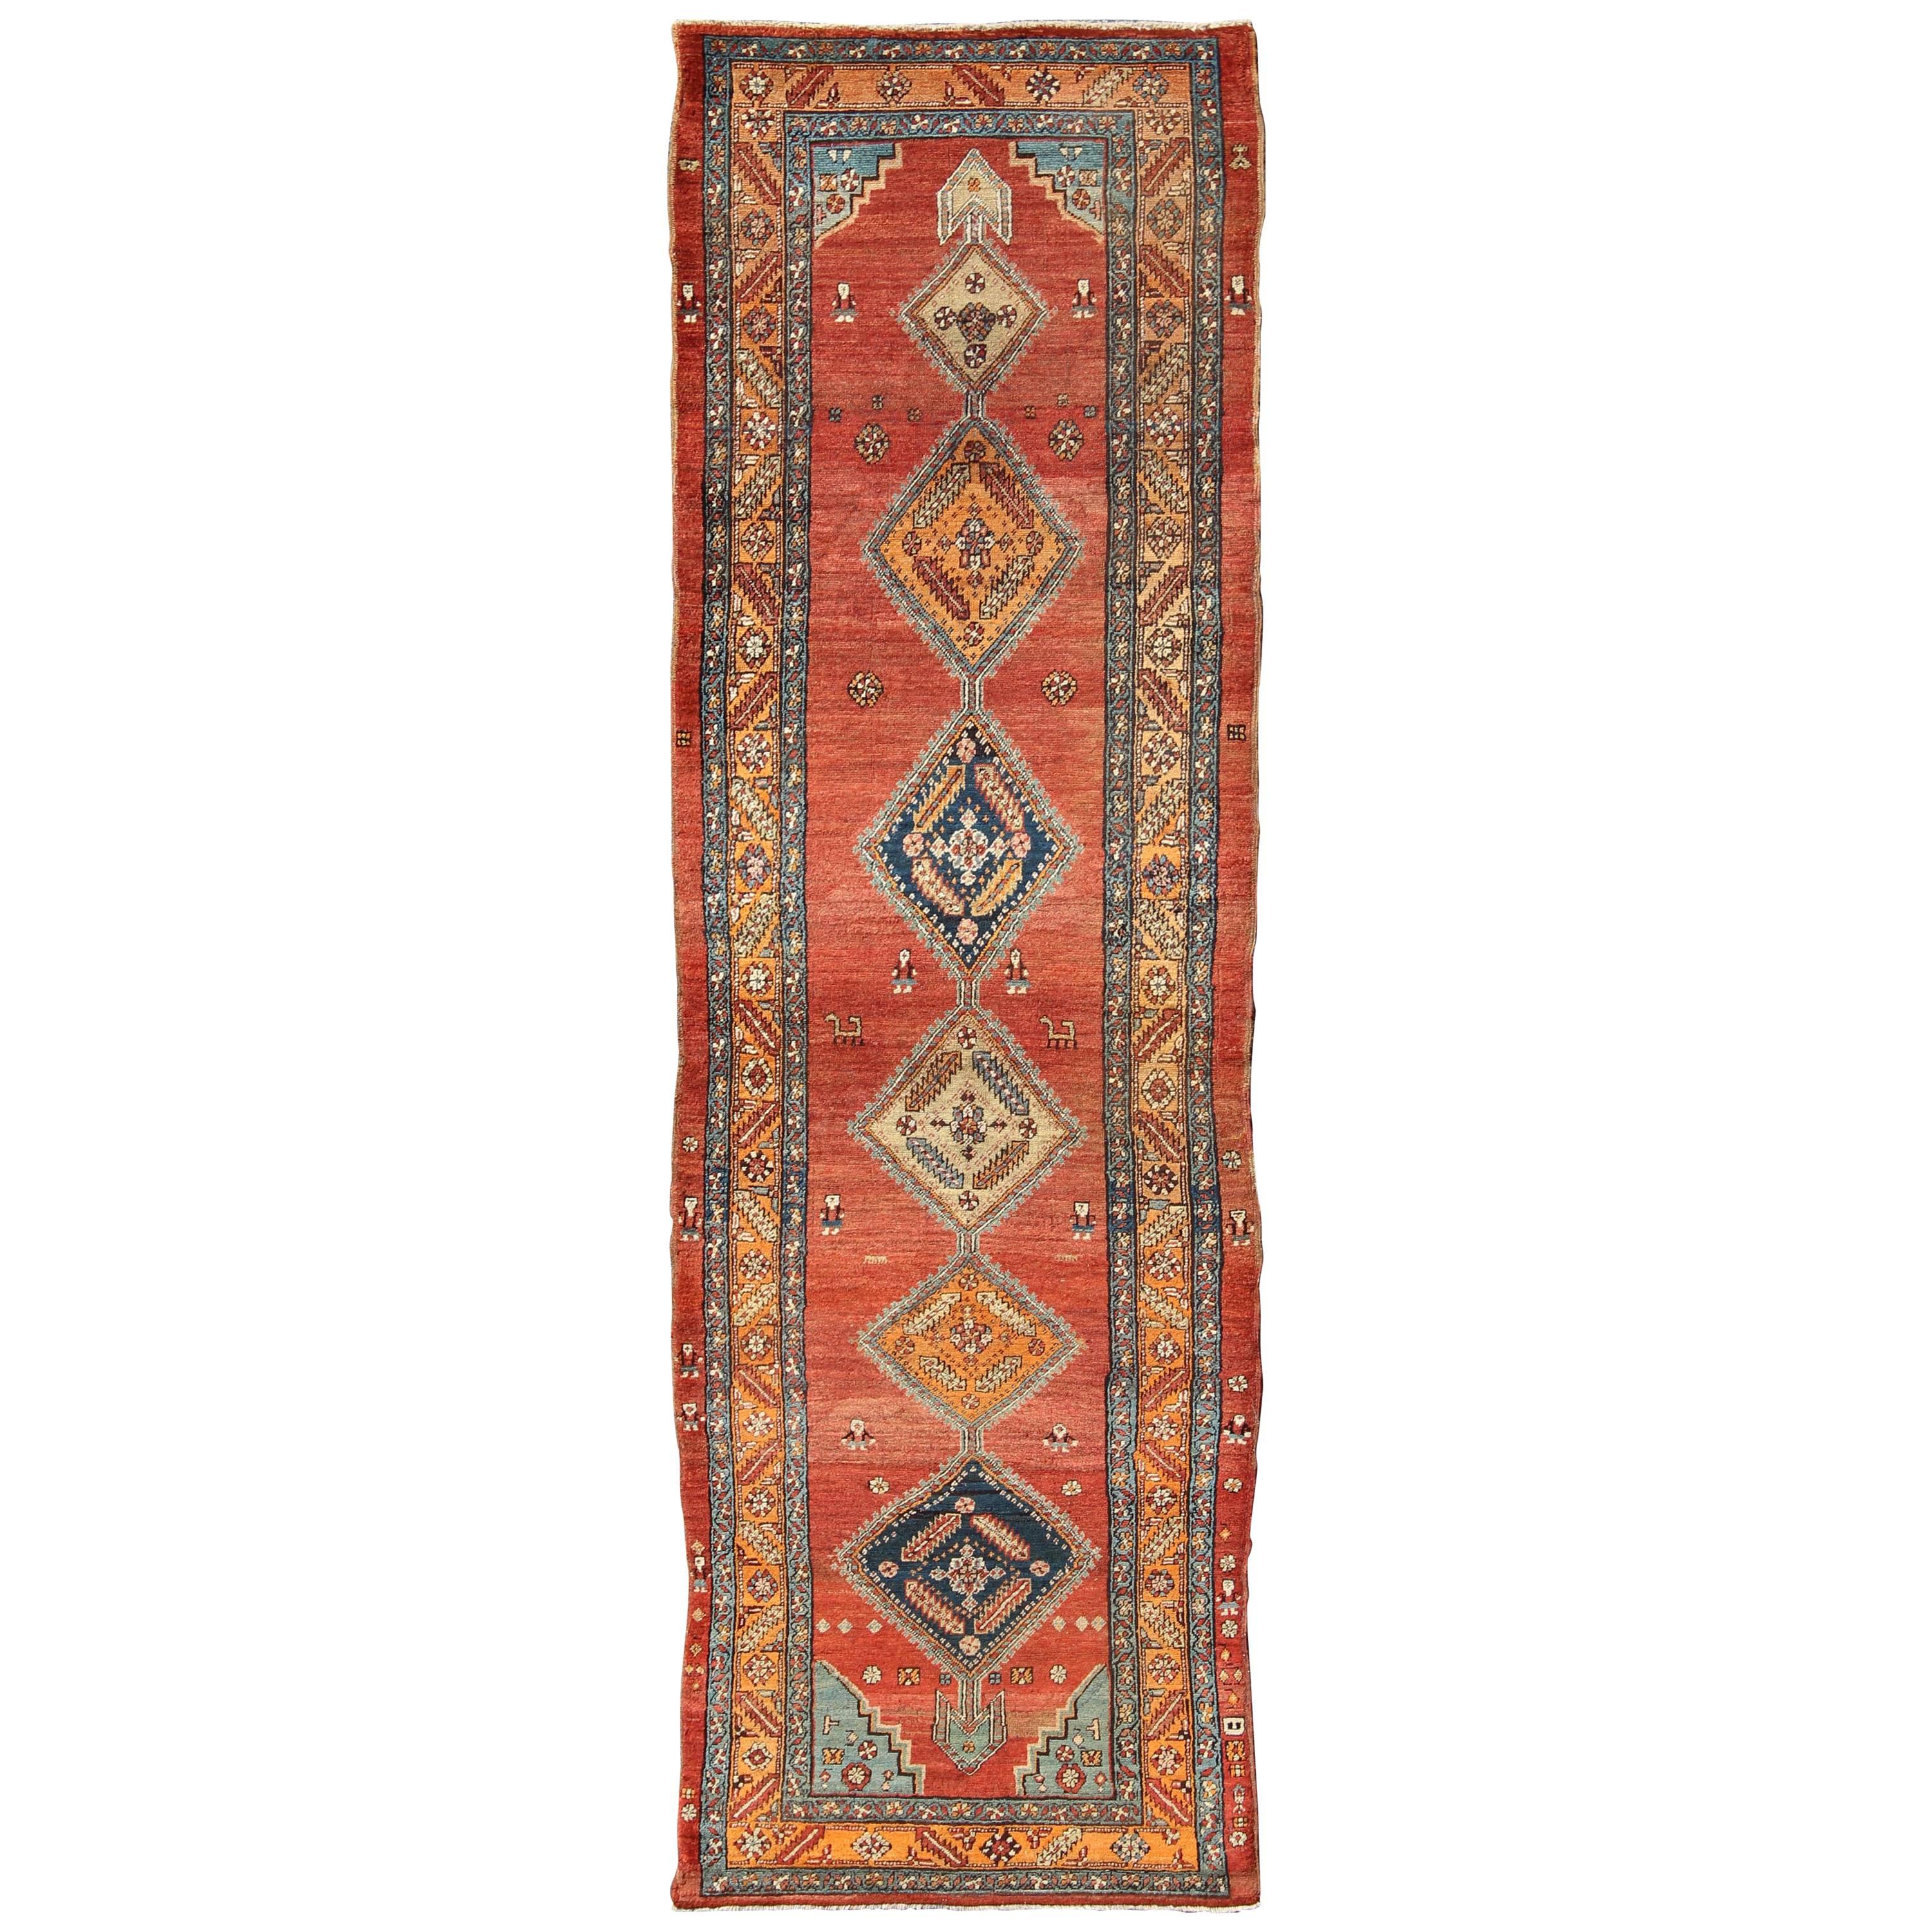 Late 19th Century Antique Persian Bakshaish Rug with Tribal Medallions in Red